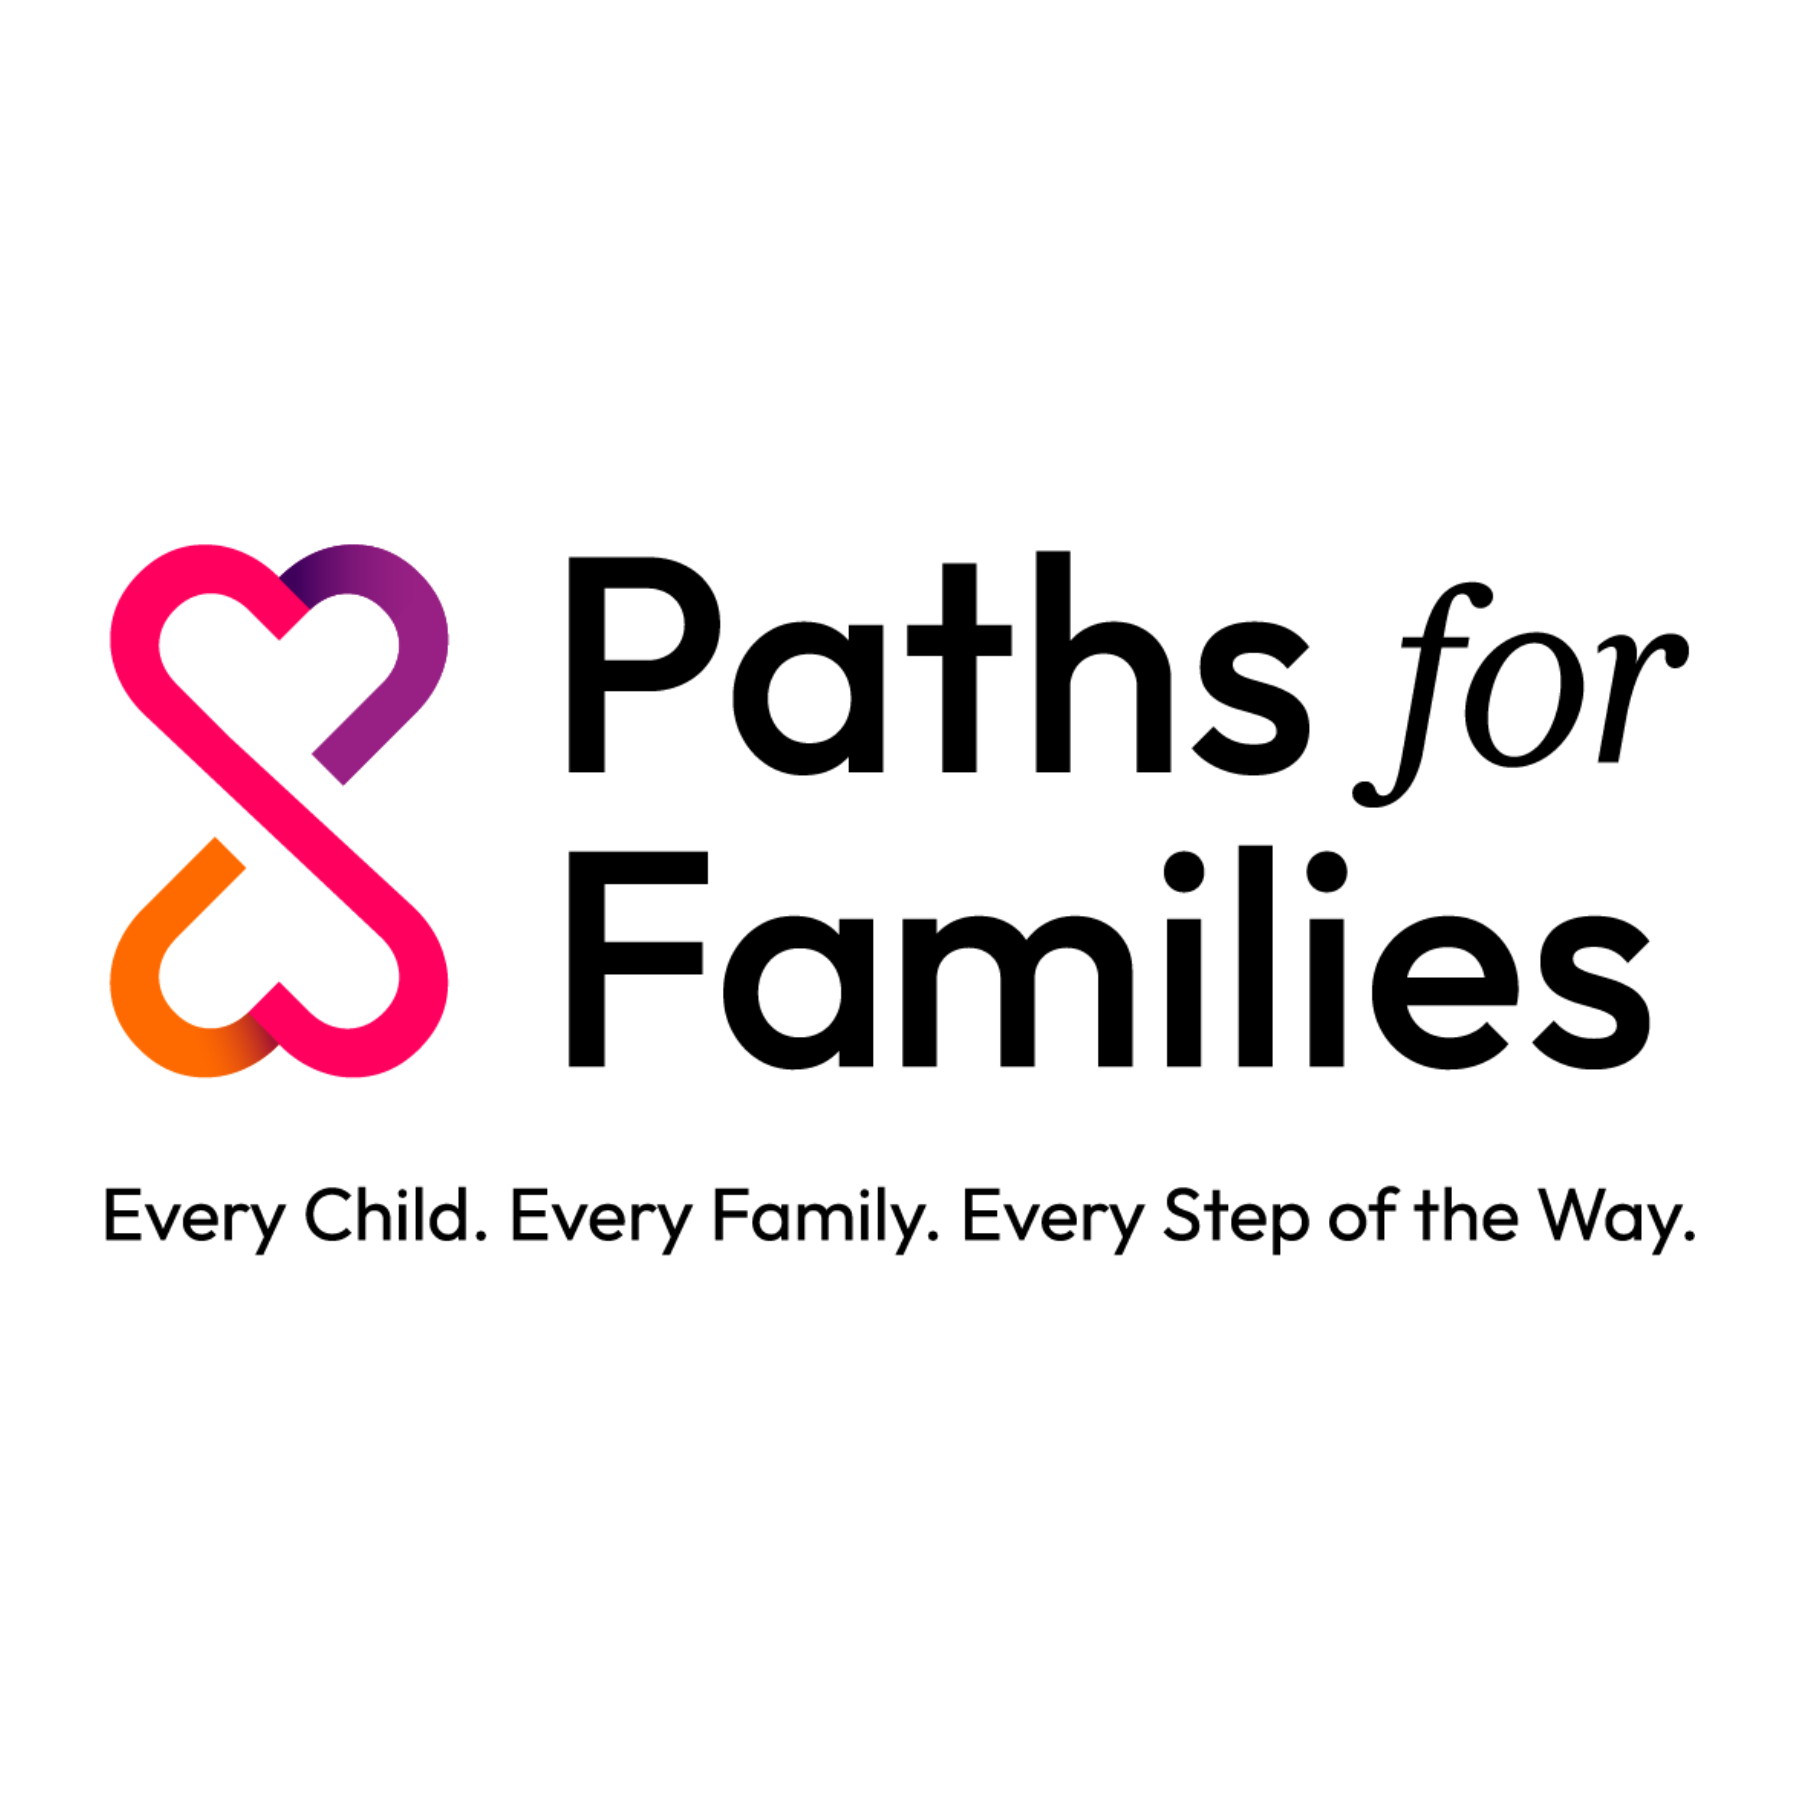 Paths for Families Logo with intertwined hearts on the left and Paths for Families in bold text. Below is the organization timeline, Every Child, Every Family, Every Step of the Way